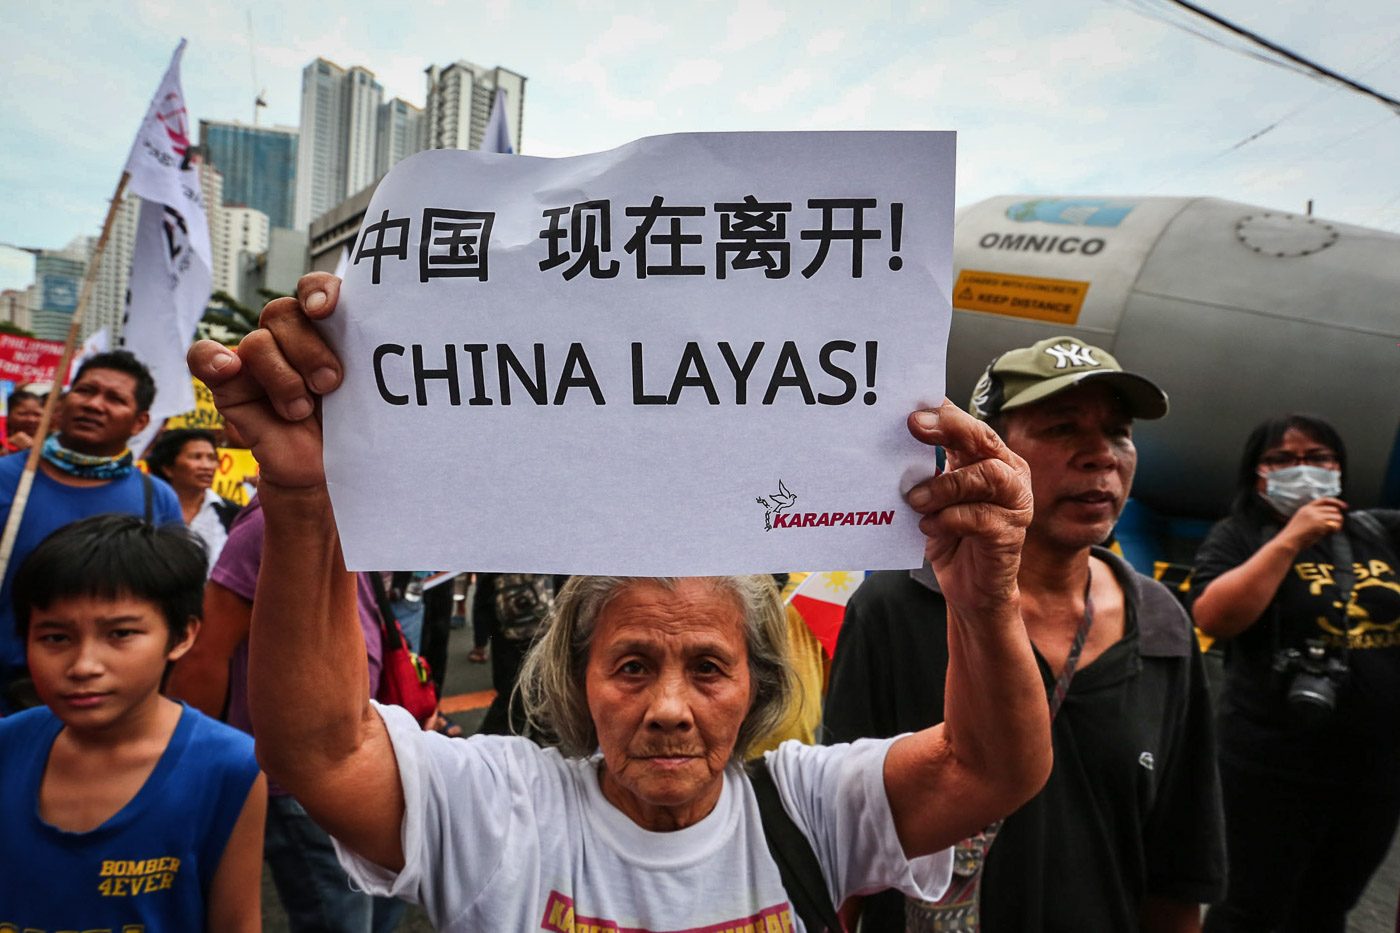 STRONG STAND. A woman carries a sign with the words "China layas!" during a protest at the Chinese Consulate in light of Xi Jinping's state visit to the Philippines. Photo by Jire Carreon/Rappler 